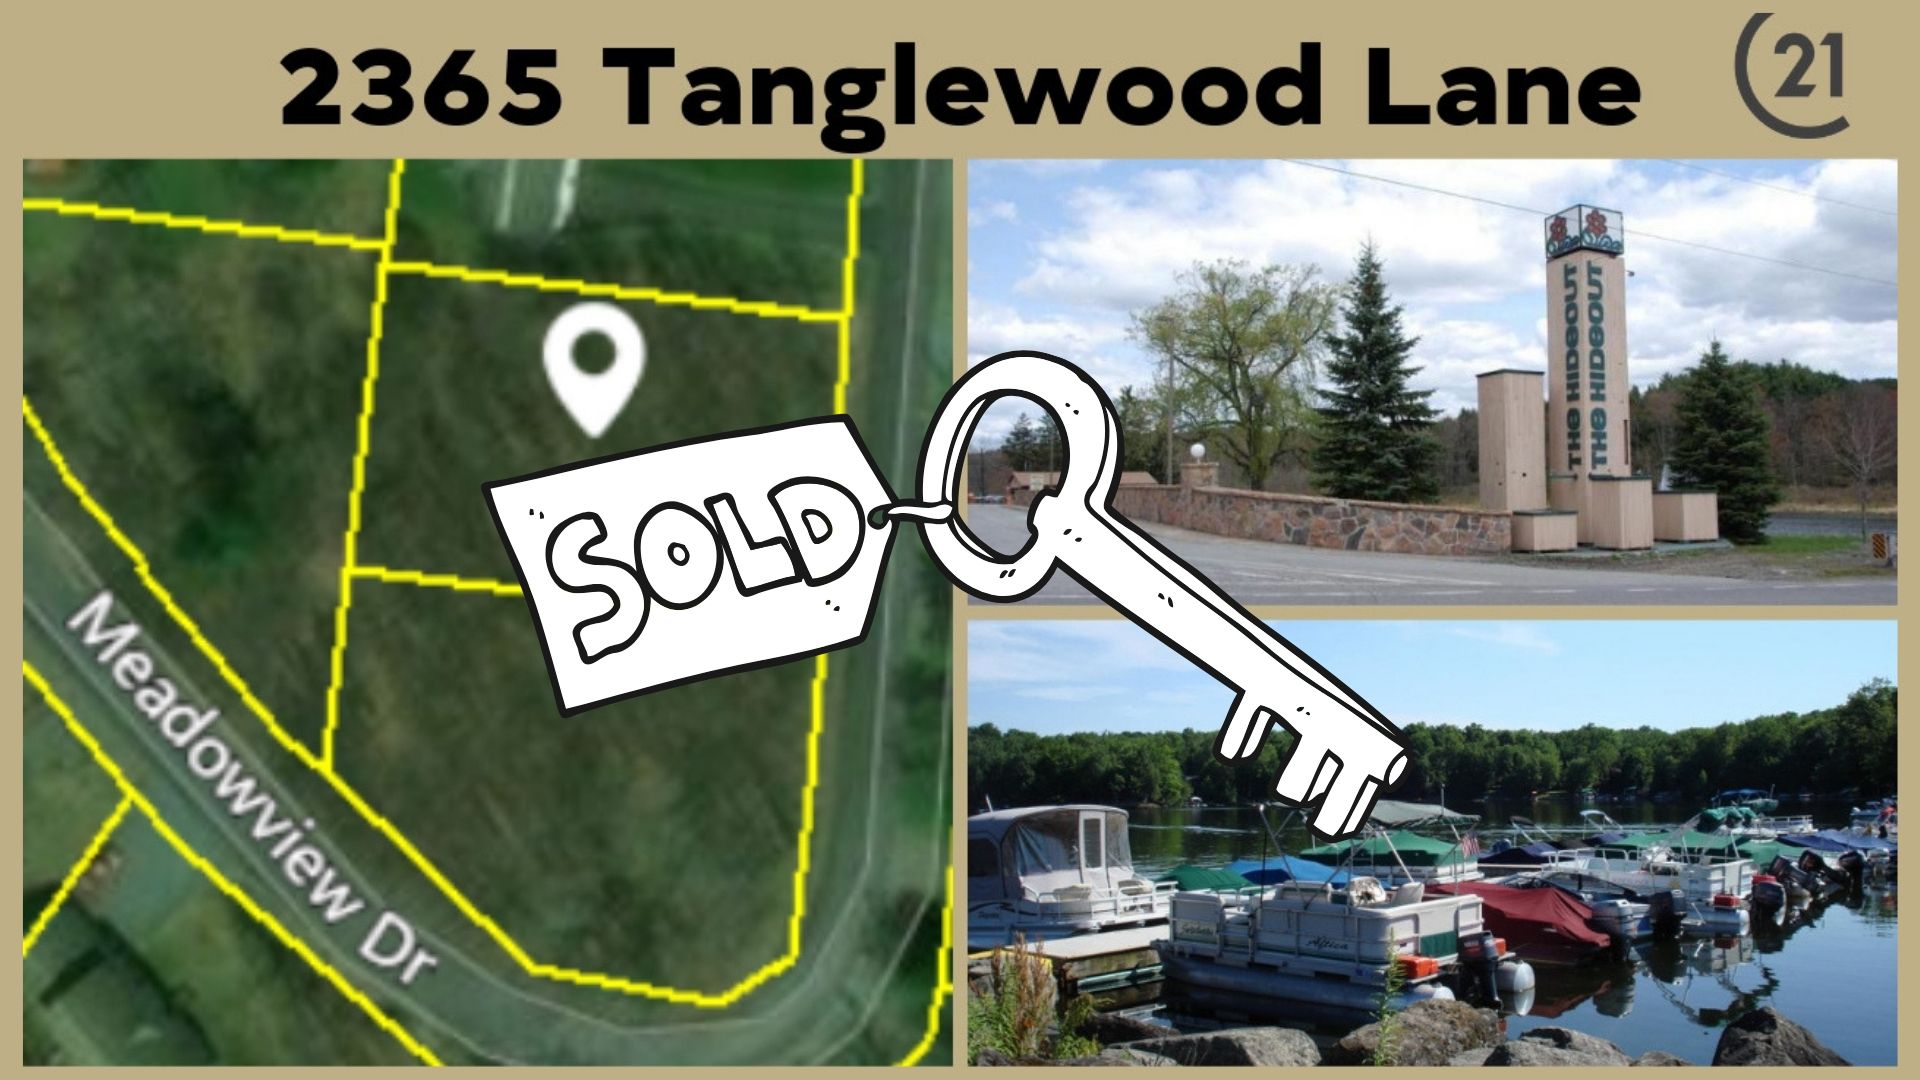 2365 Tangelwood Sold